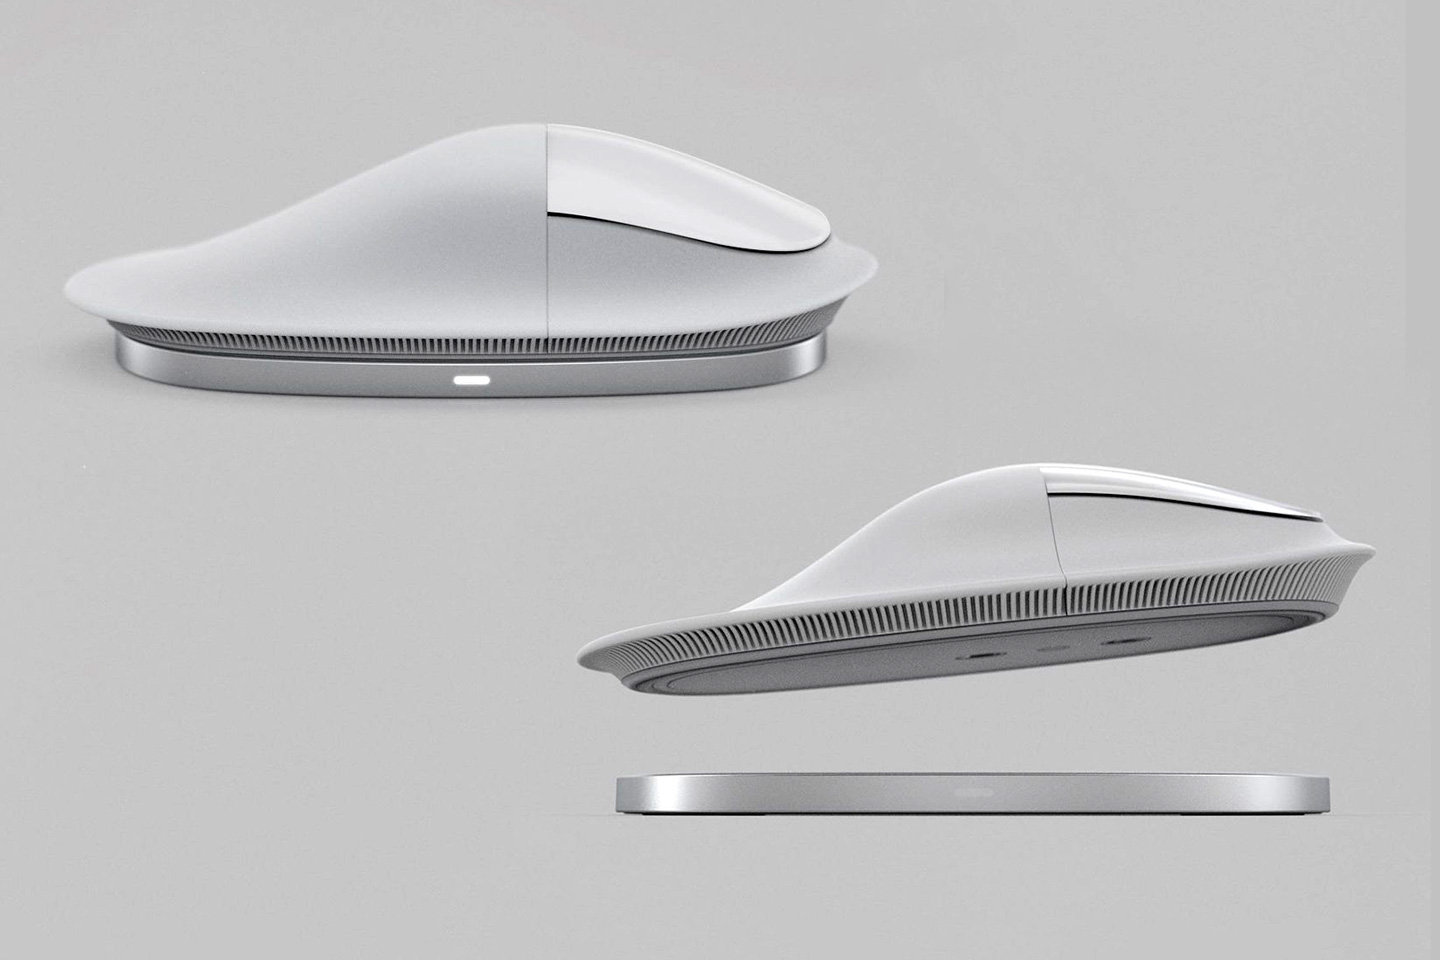 https://www.yankodesign.com/images/design_news/2021/11/apples-magic-mouse-gets-its-very-first-design-upgrade-with-this-ergonomic-wireless-charging-concept/apple_magic_mushroom_mouse_1.jpg